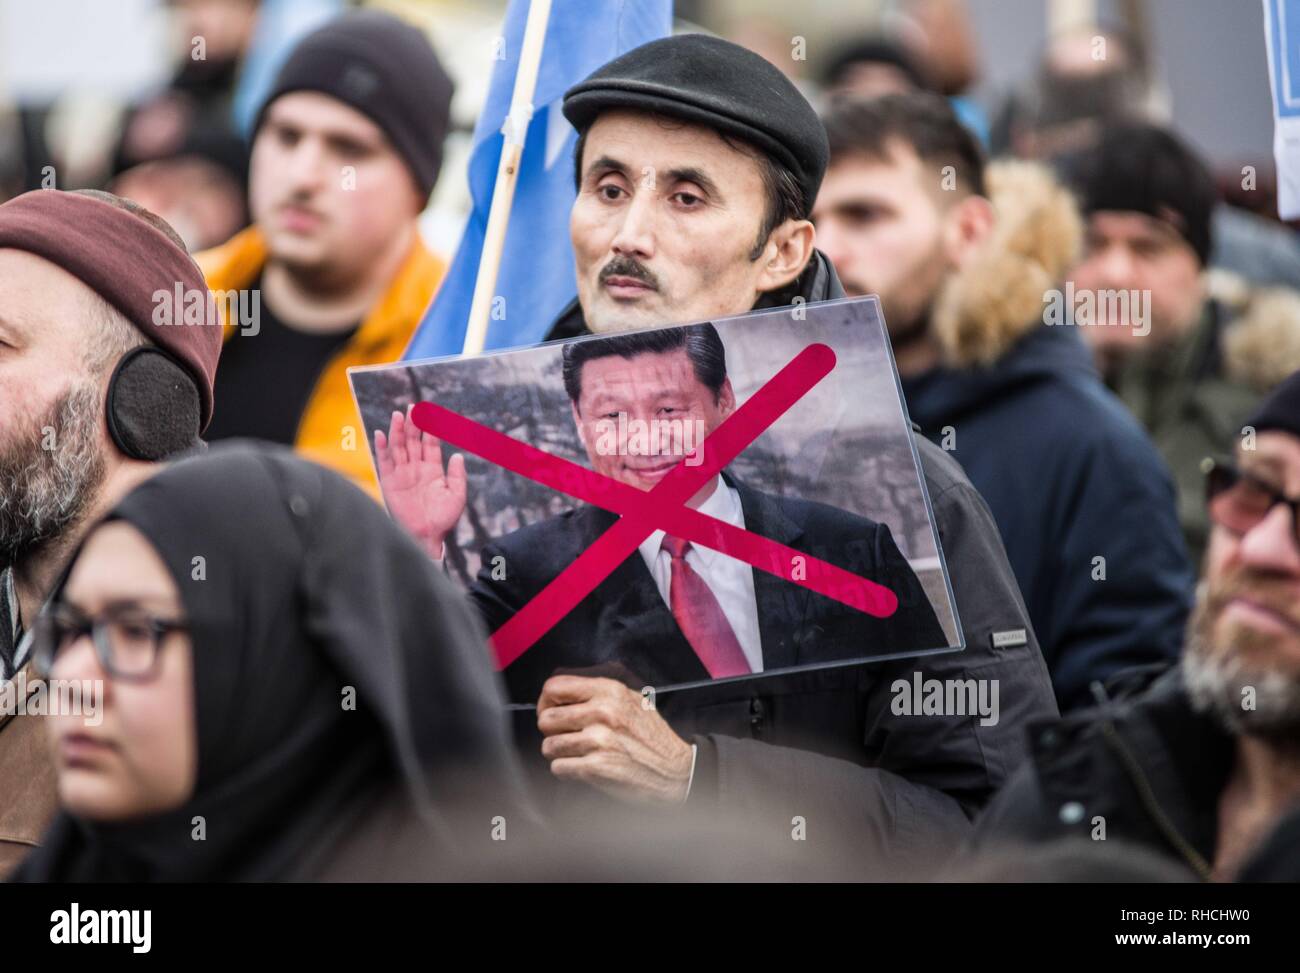 Munich, Bavaria, Germany. 2nd Feb, 2019. A protestor against the detentions of the Uyghurs in China holds a sign of a crossed out President Xi Jinping of China. Over 400 primarily Turkish demonstrators assembled at Munich's Max Joseph Platz to protest against the so-called 'Muslim Crackdown'' by the Chinese Communist Party in the Xinjiang Autonomous Region of China. The region is contains roughly 26 million people, 11 million of whom are the ethnically Turkic Uyghurs who still call the region East Turkistan . The CCP has placed upwards of 1 million Uyghurs in reeducation camps, as Credit: ZUM Stock Photo